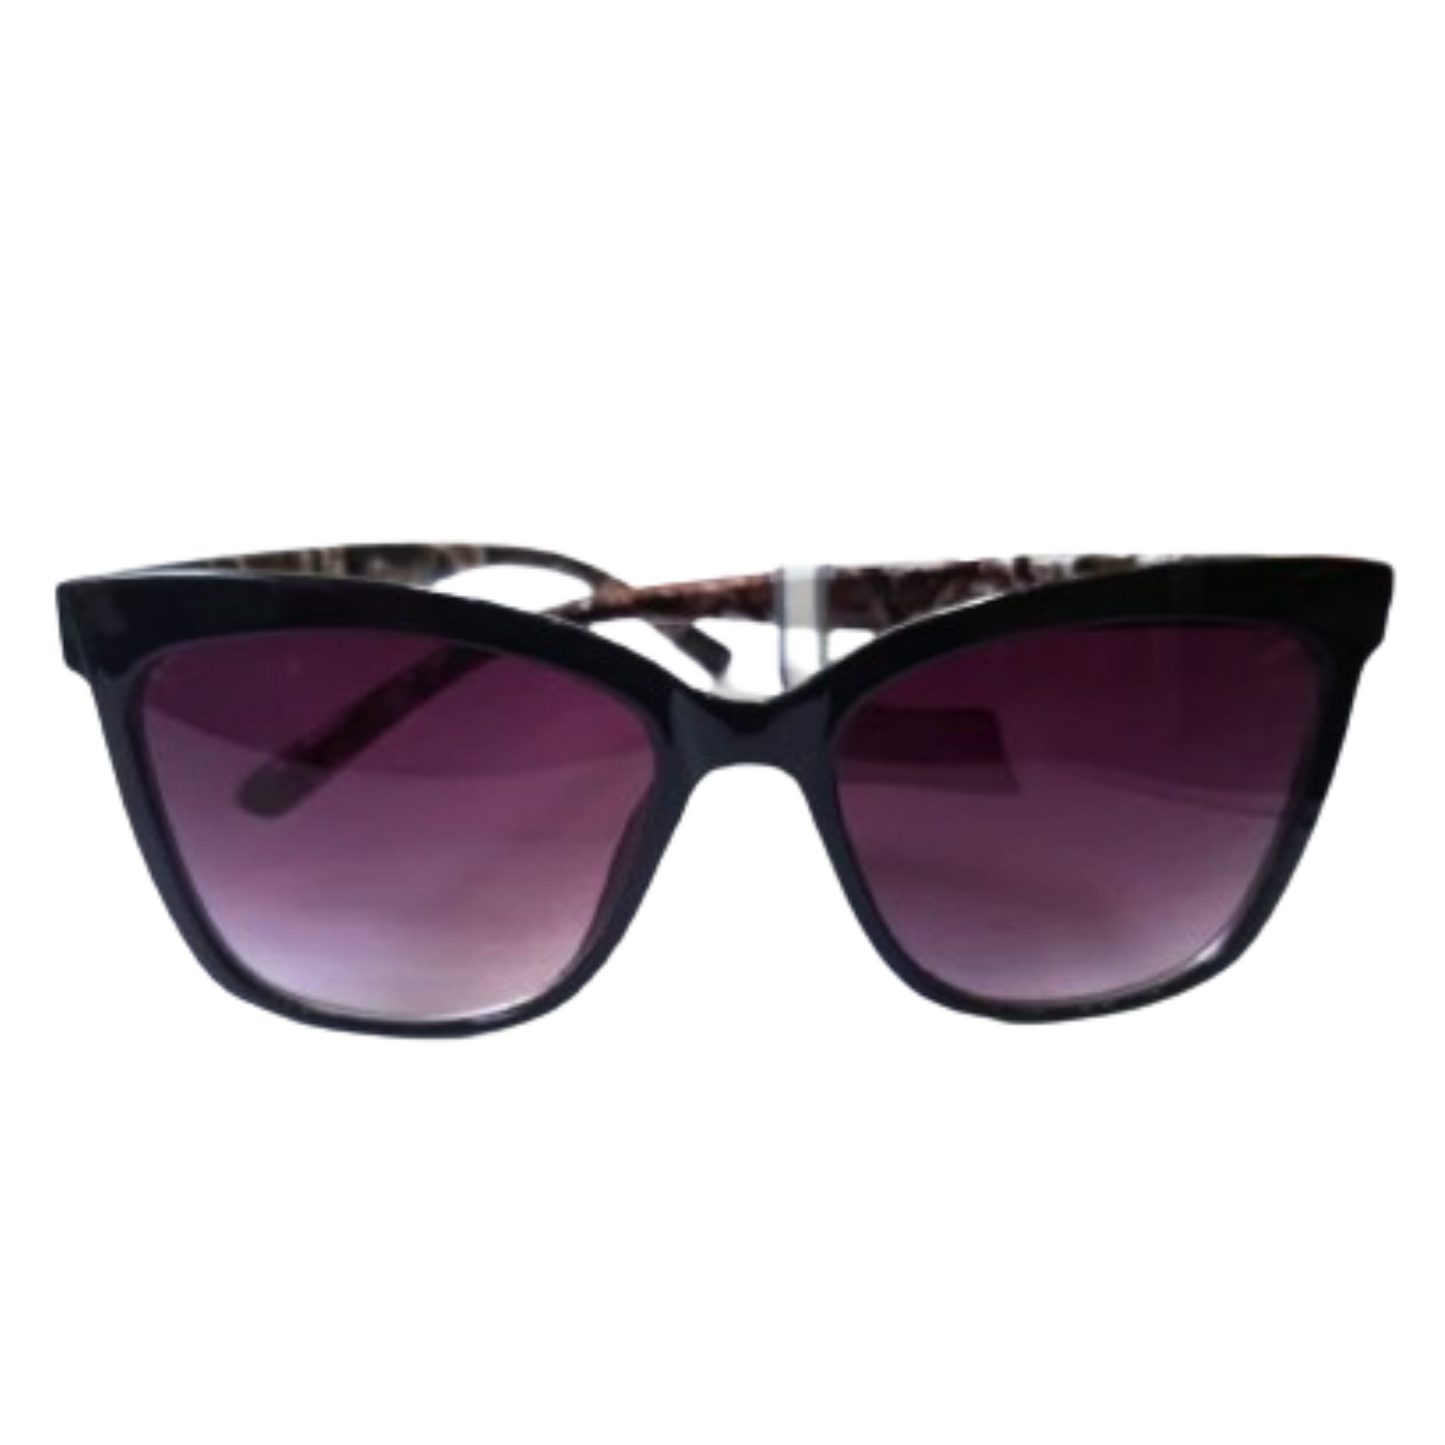 Cute Outdoor Trendy Sunglasses for Women